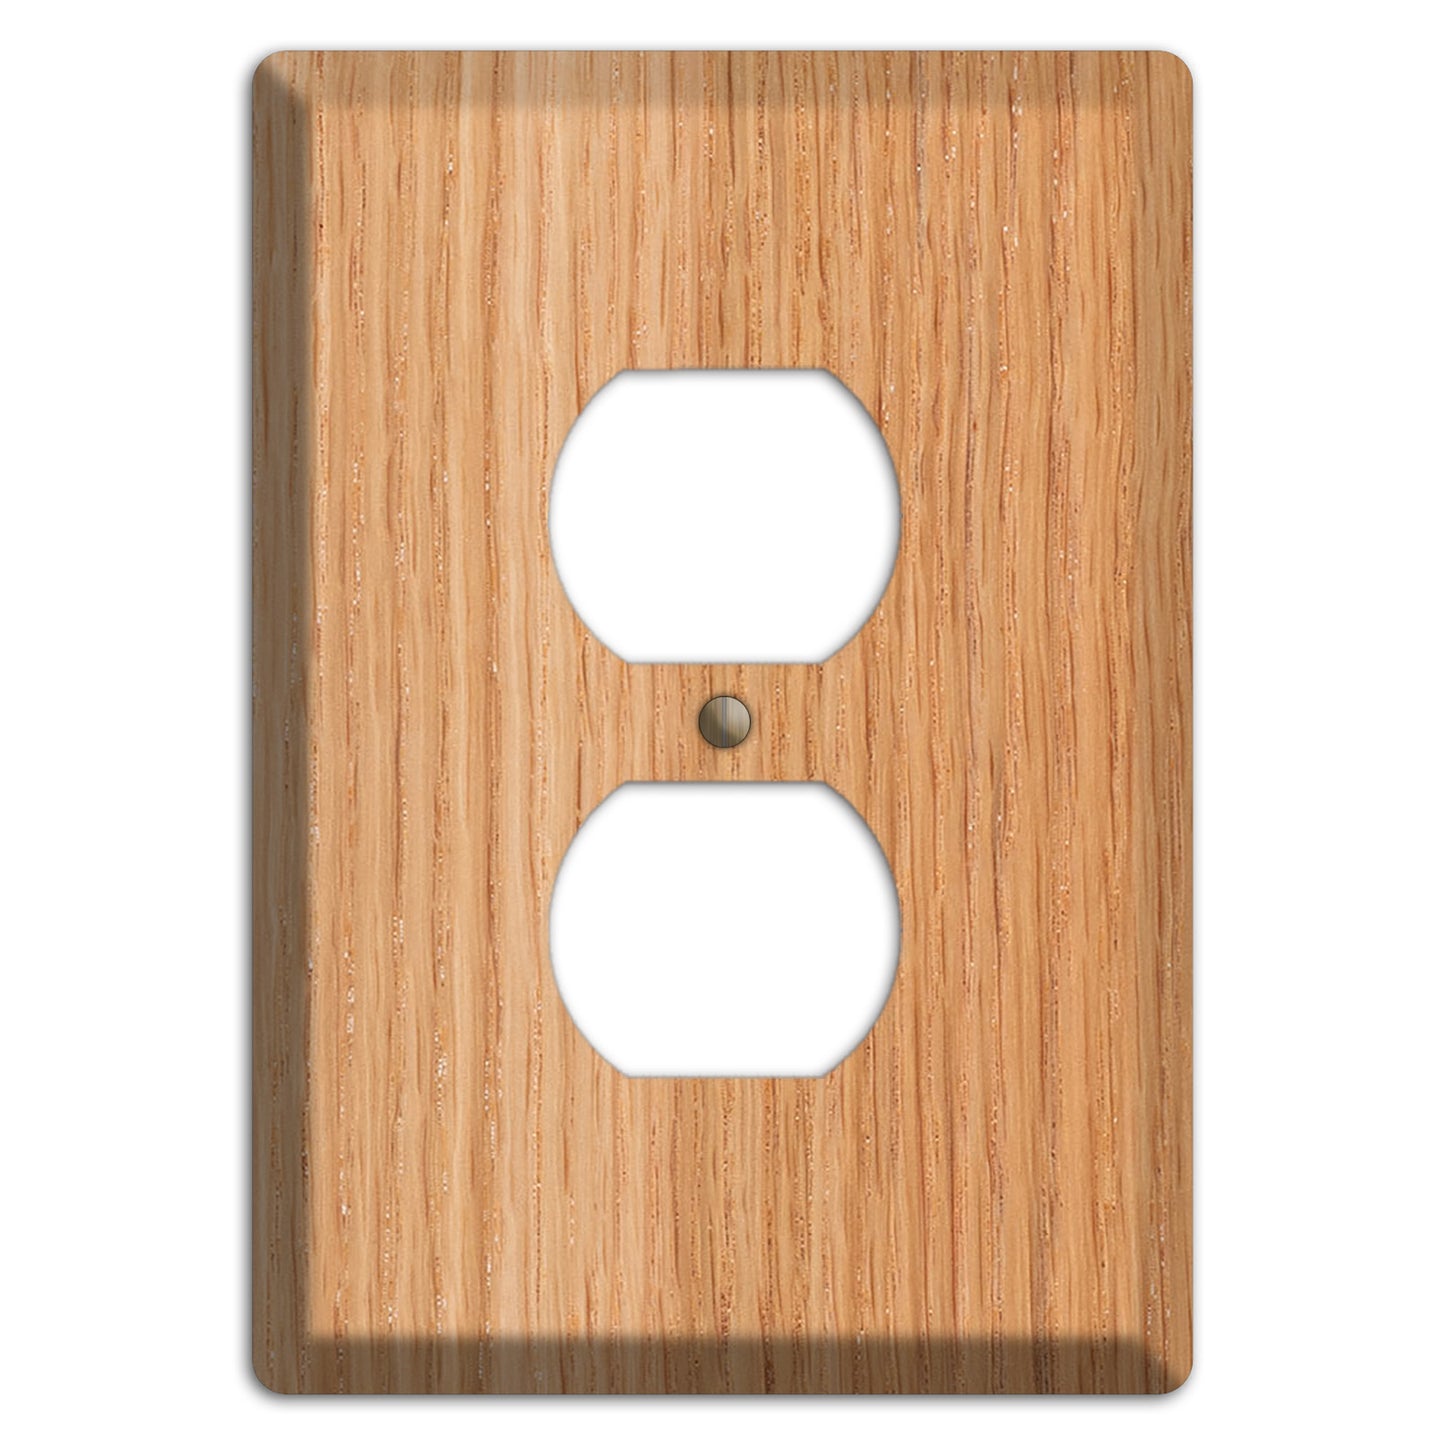 Red Oak Wood Duplex Outlet Cover Plate